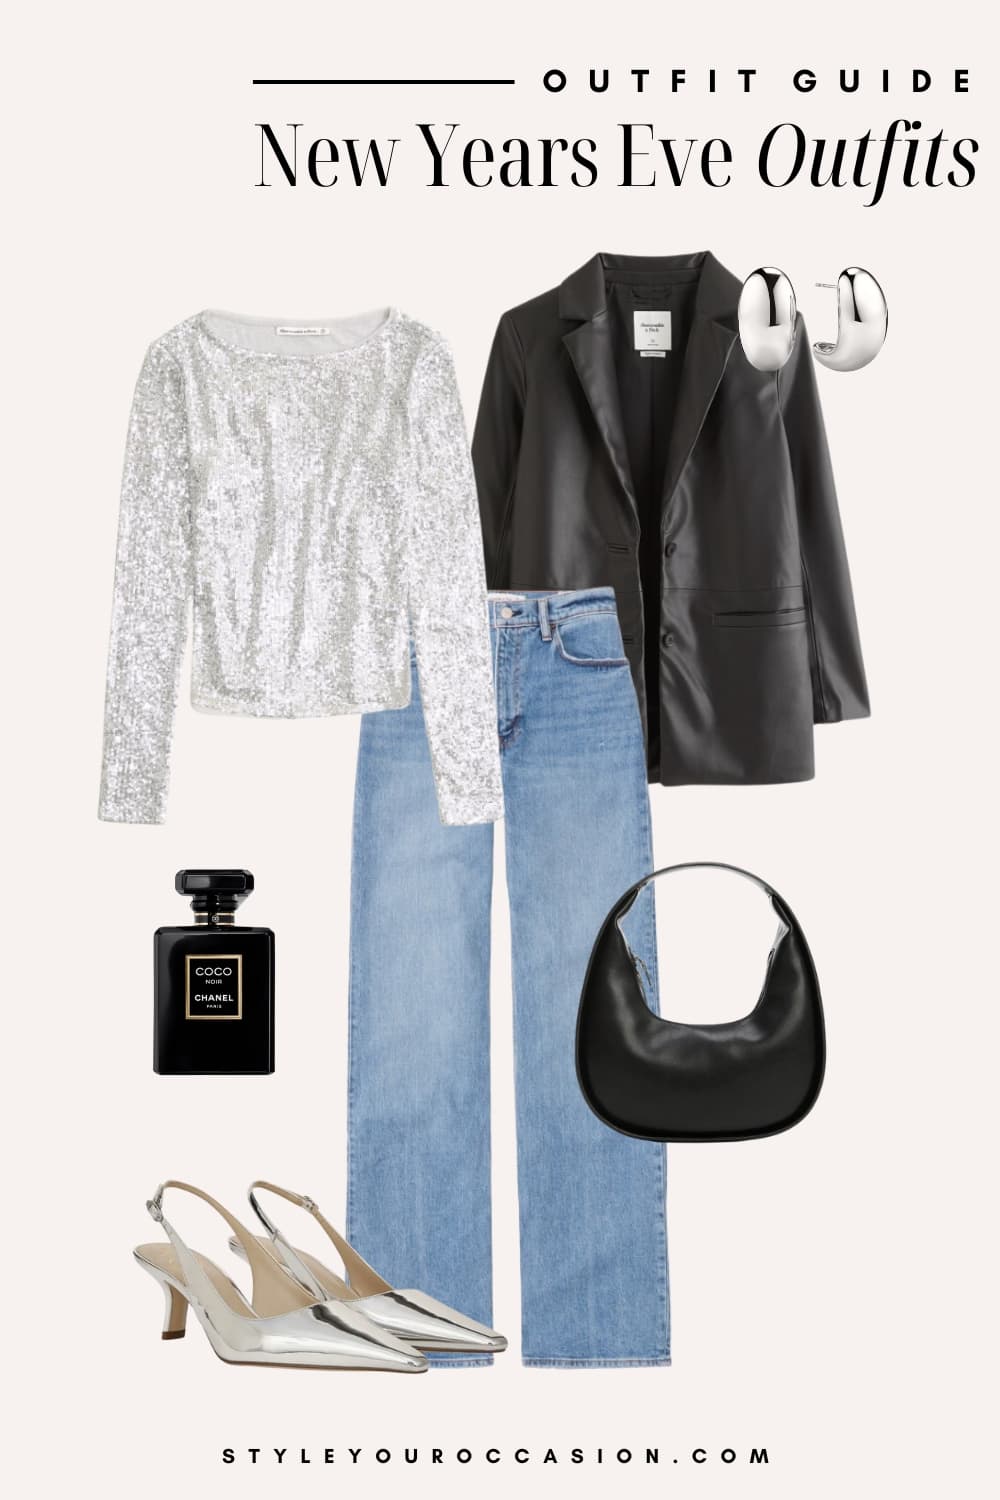 An image board of a New Year's Eve outfit featuring wide-leg jeans, a silver sequined long-sleeve top, a black leather blazer, silver slingback heels, and a black half-moon purse